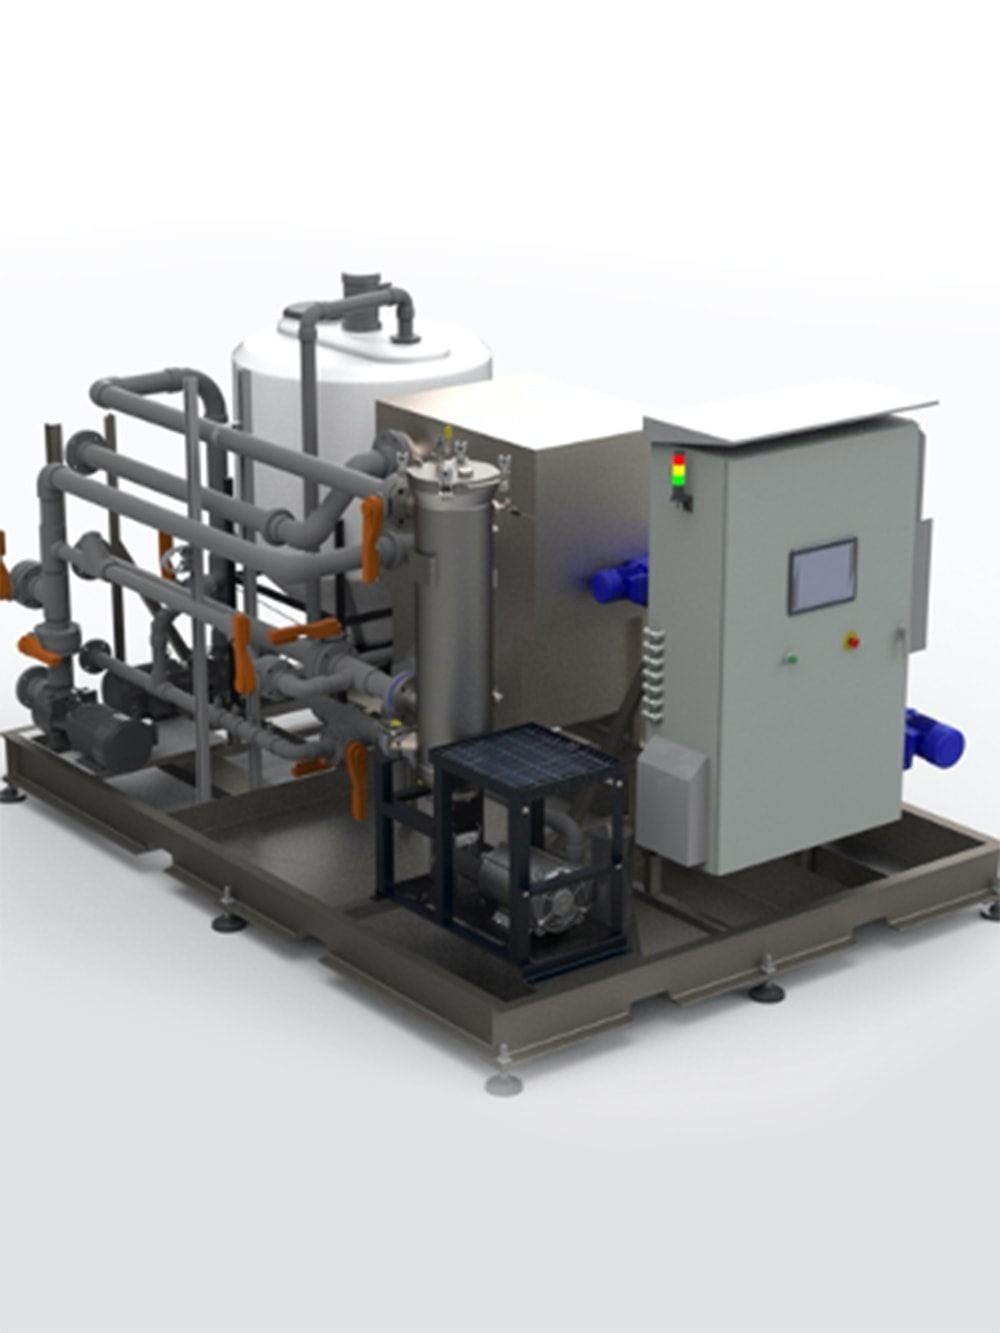 Spiral water technologies introduces packaged, turn-key  high solids water recovery system